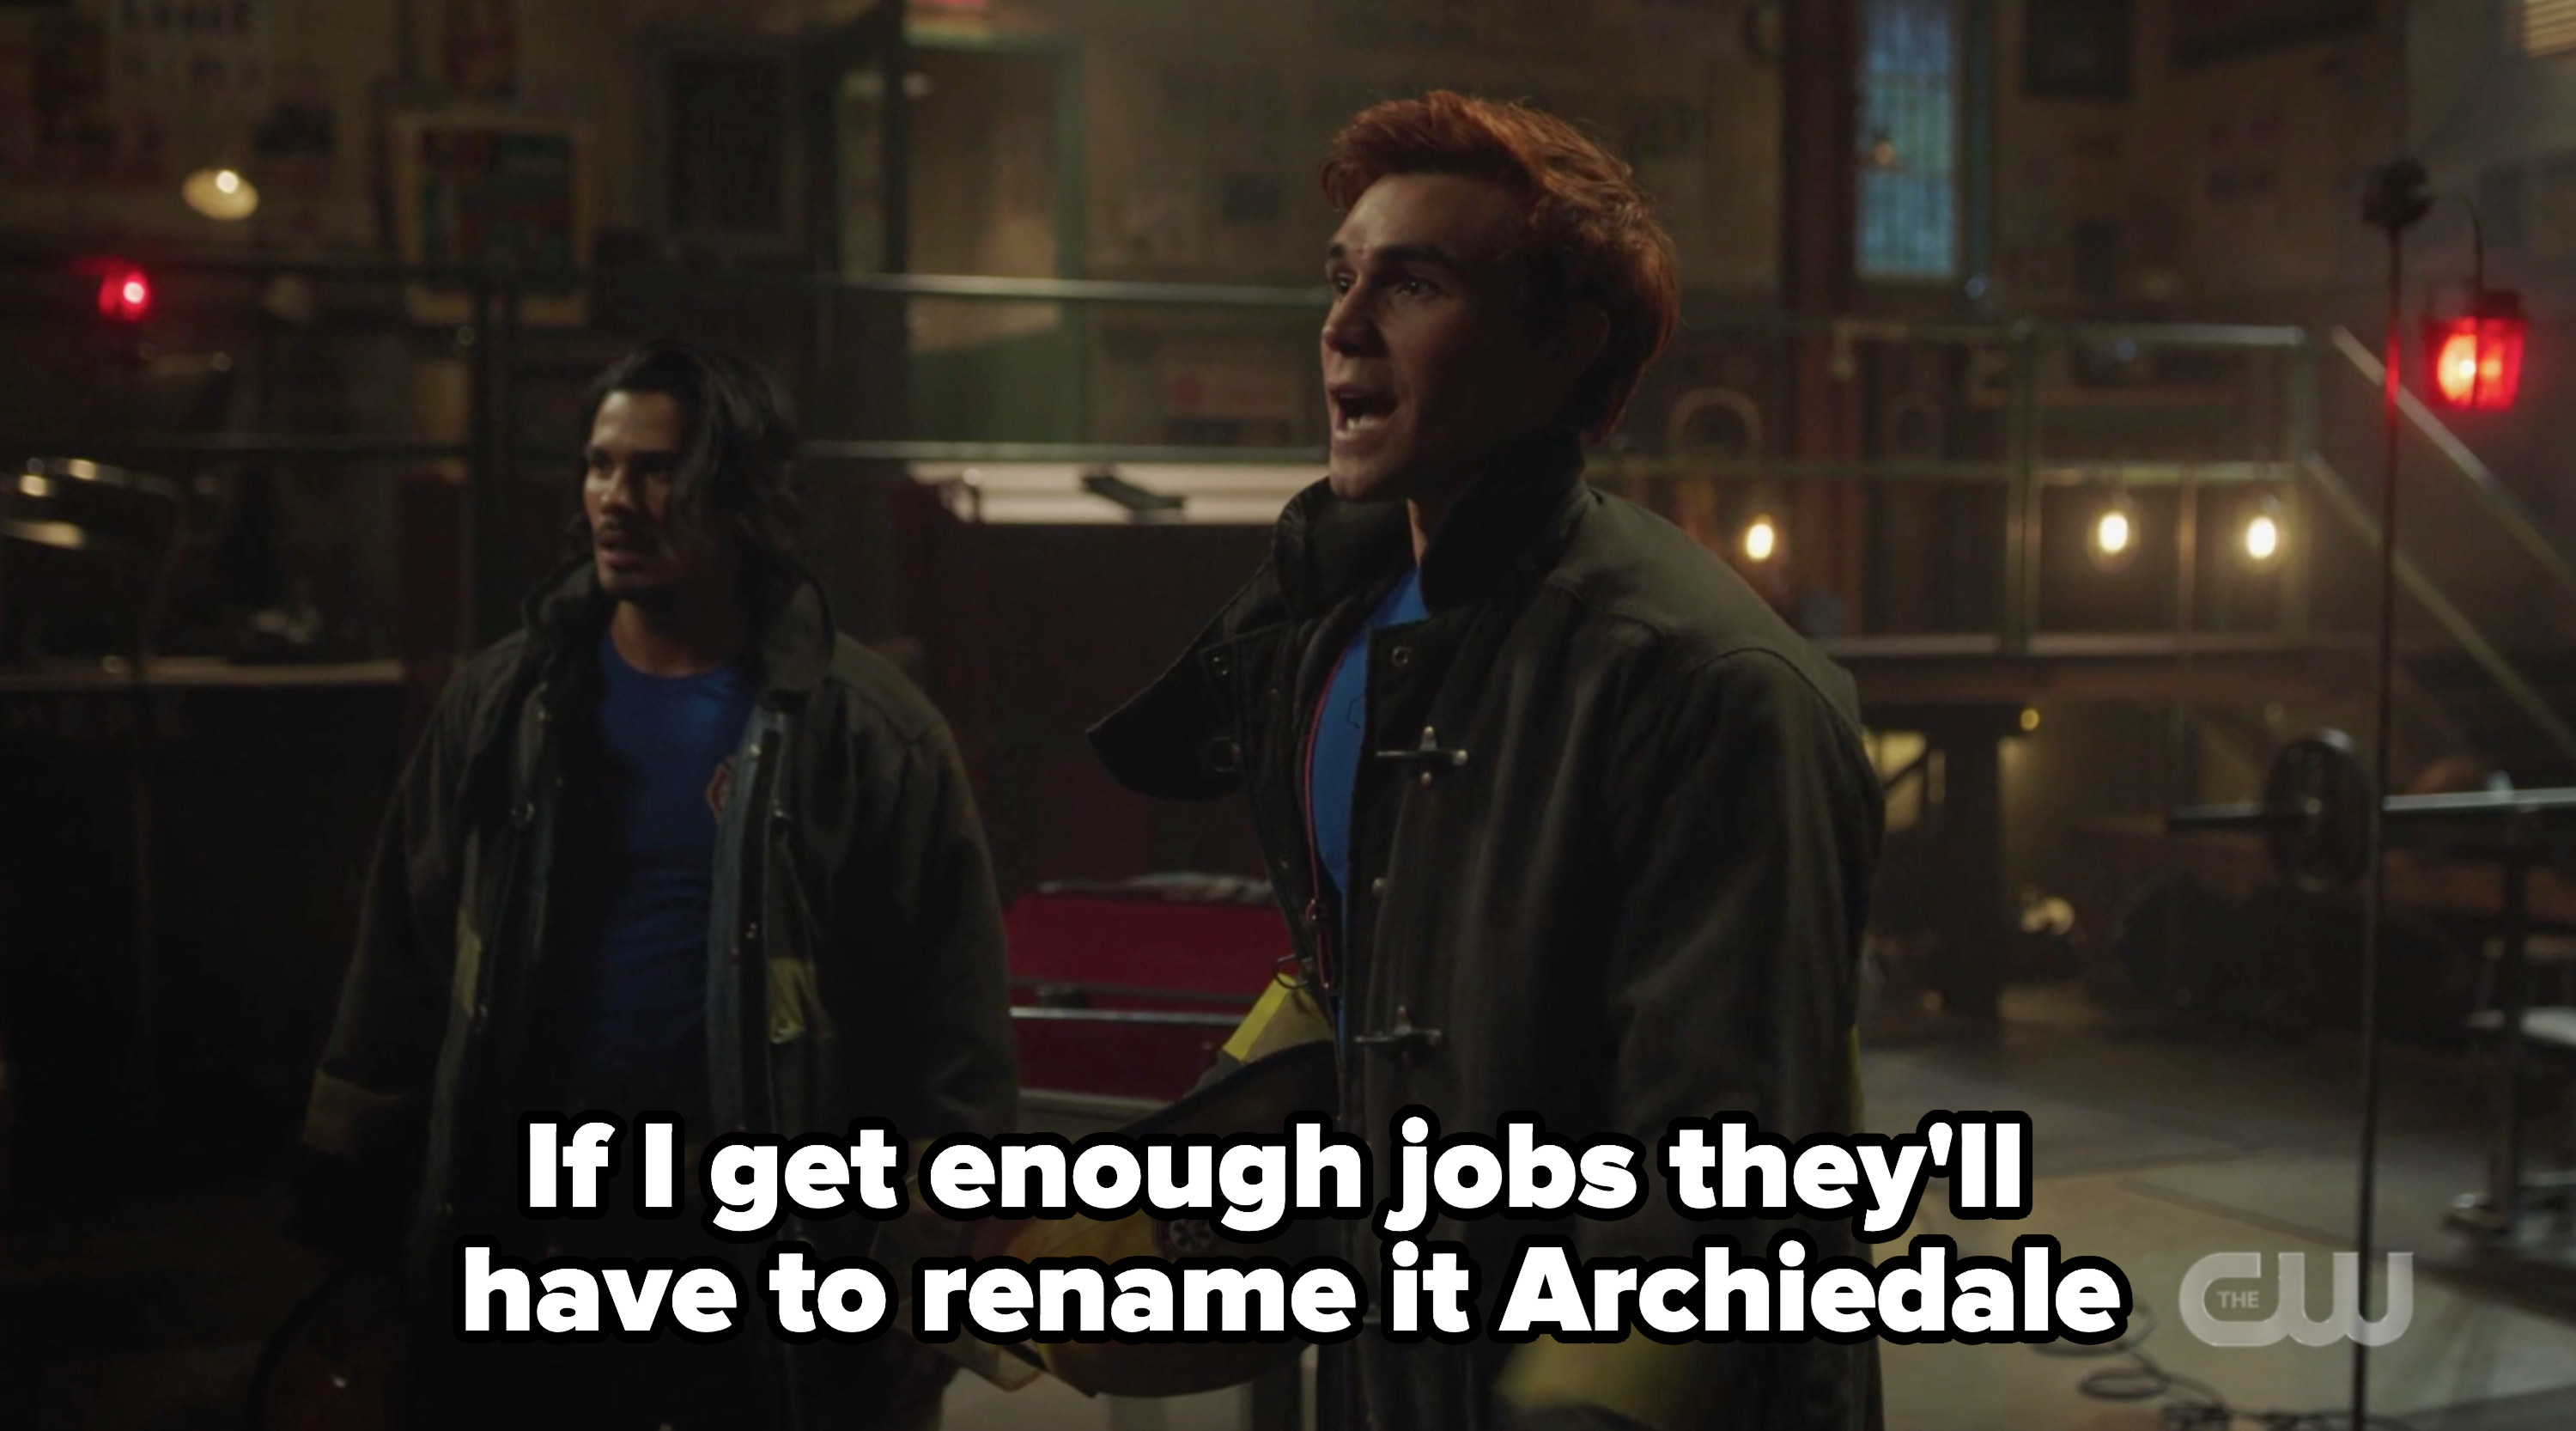 Archie as a fire fighter with a caption about renaming riverdale archiedale because he has so many jobes